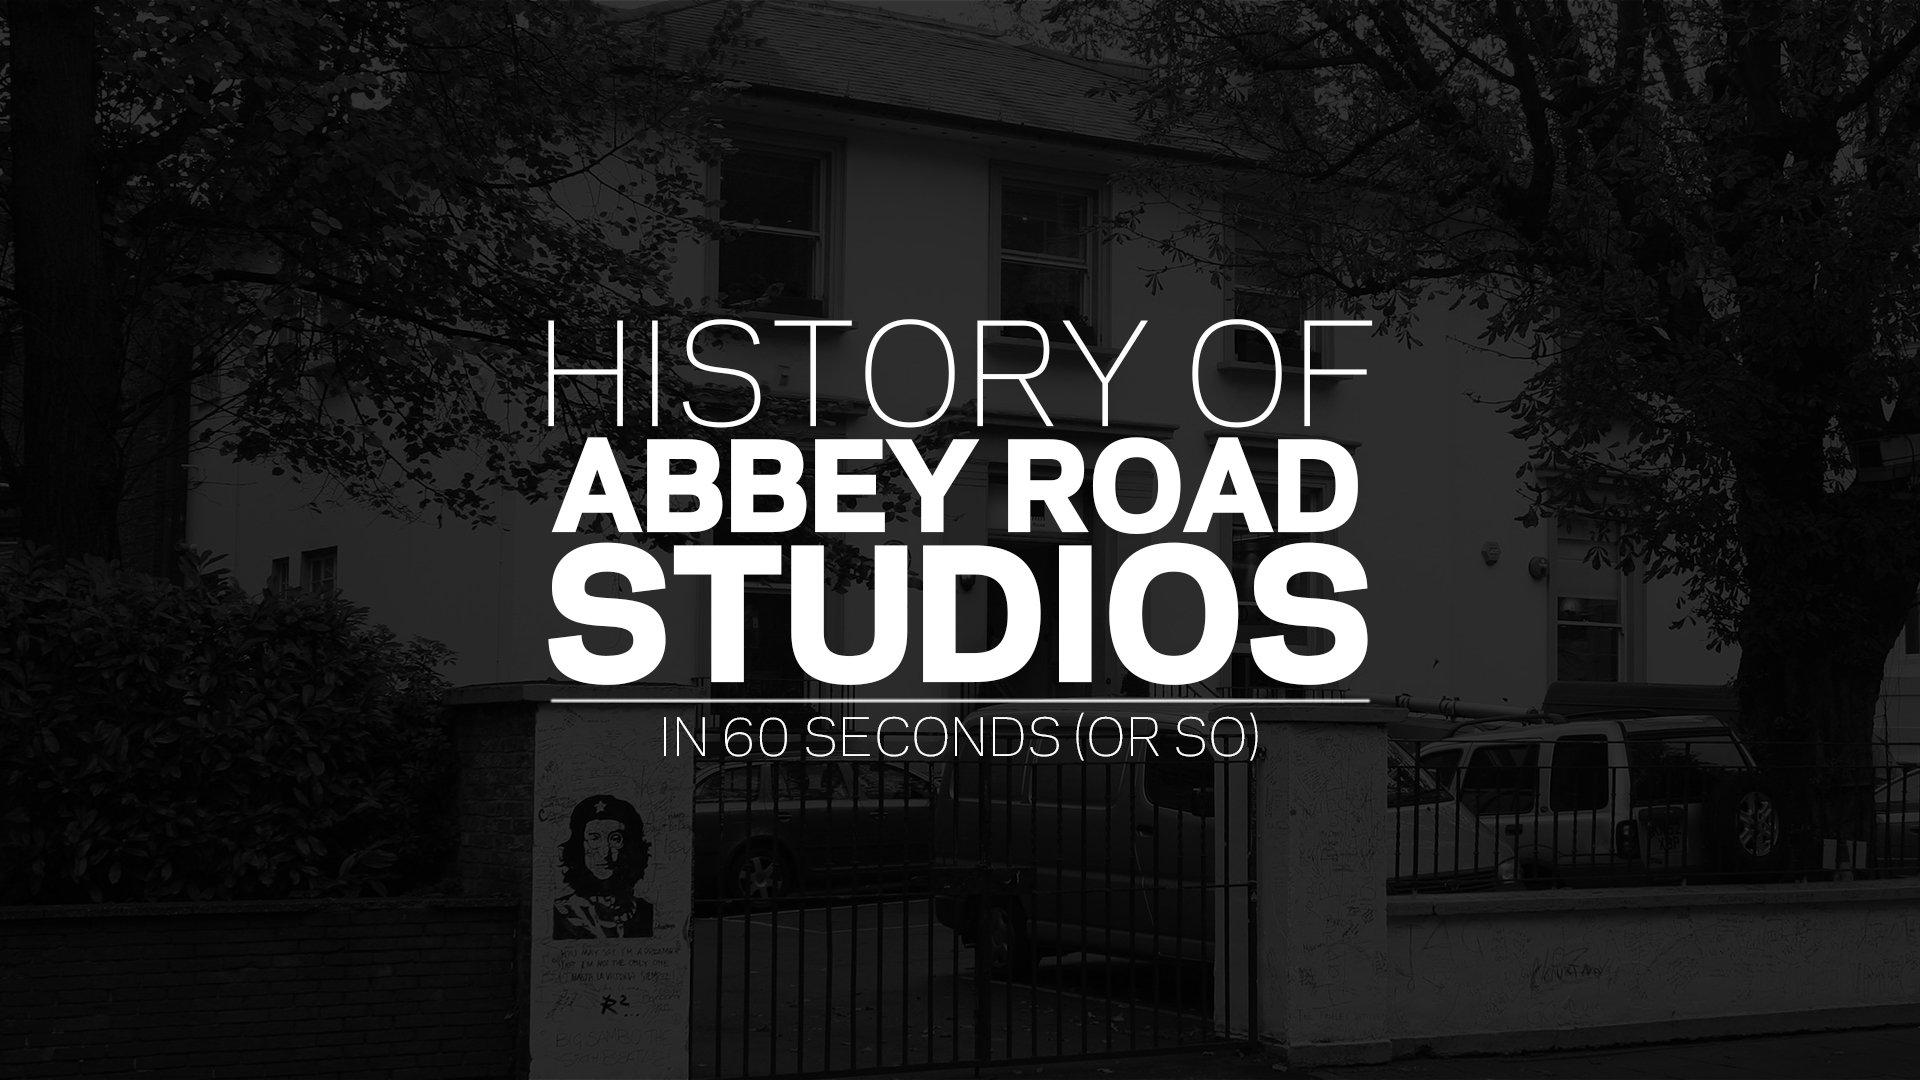 Walk With The Beatles Down Abbey Road | History Of